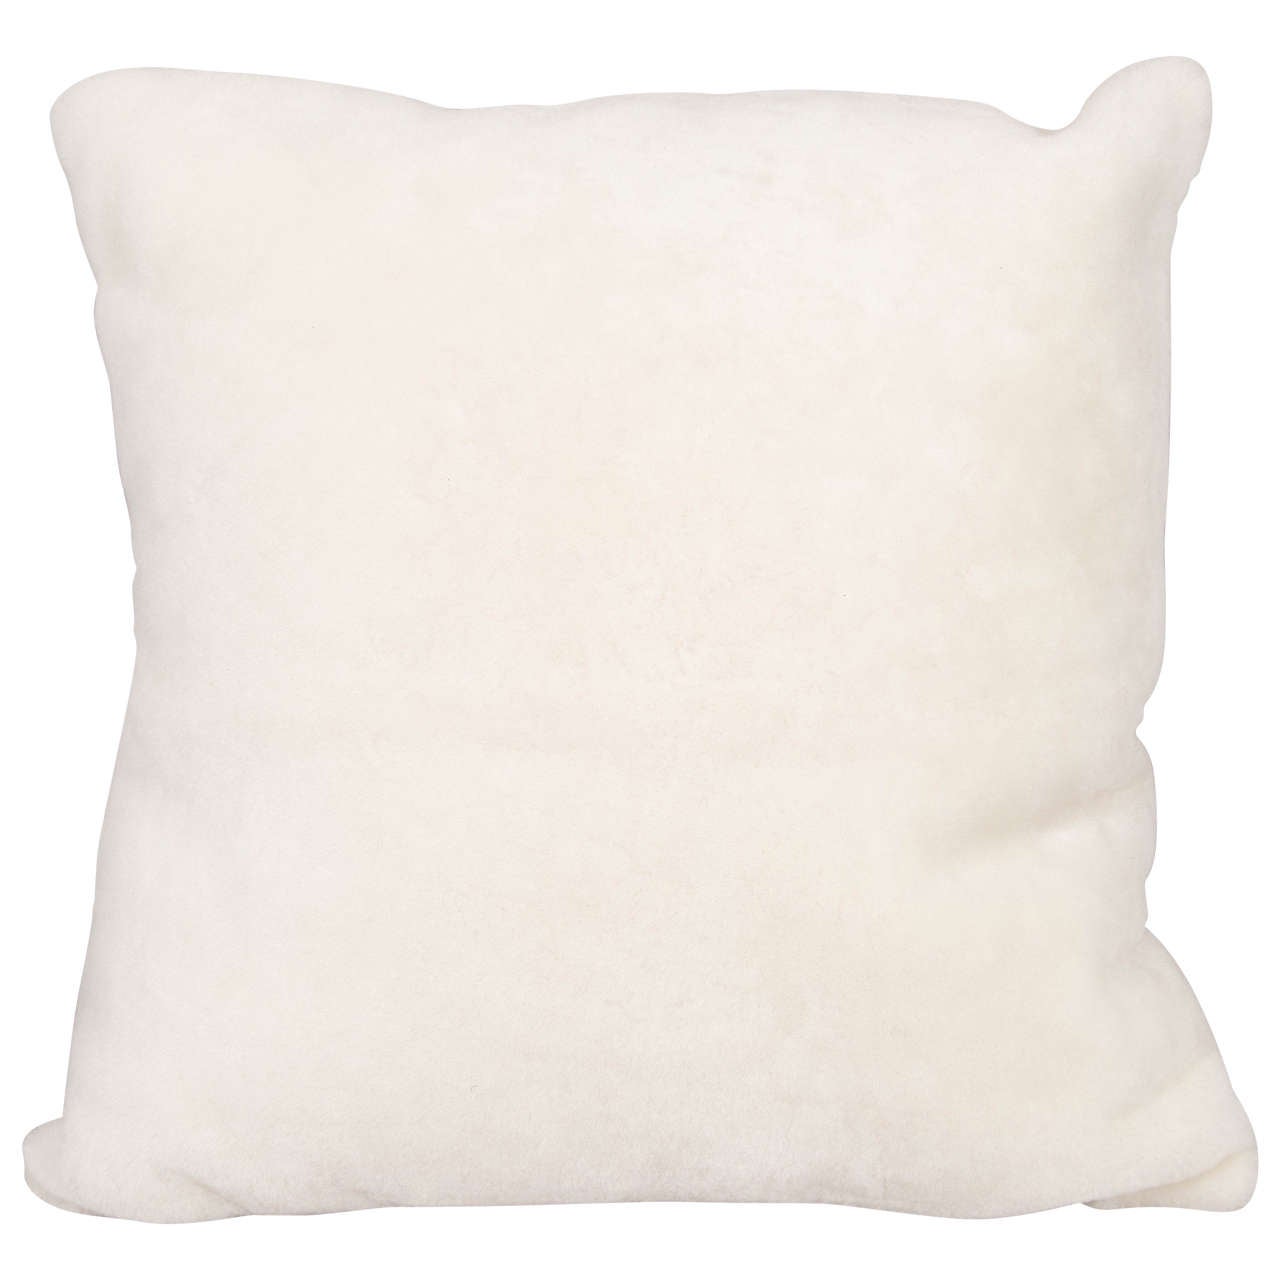 Custom Shearling Pillow with Suede Backing